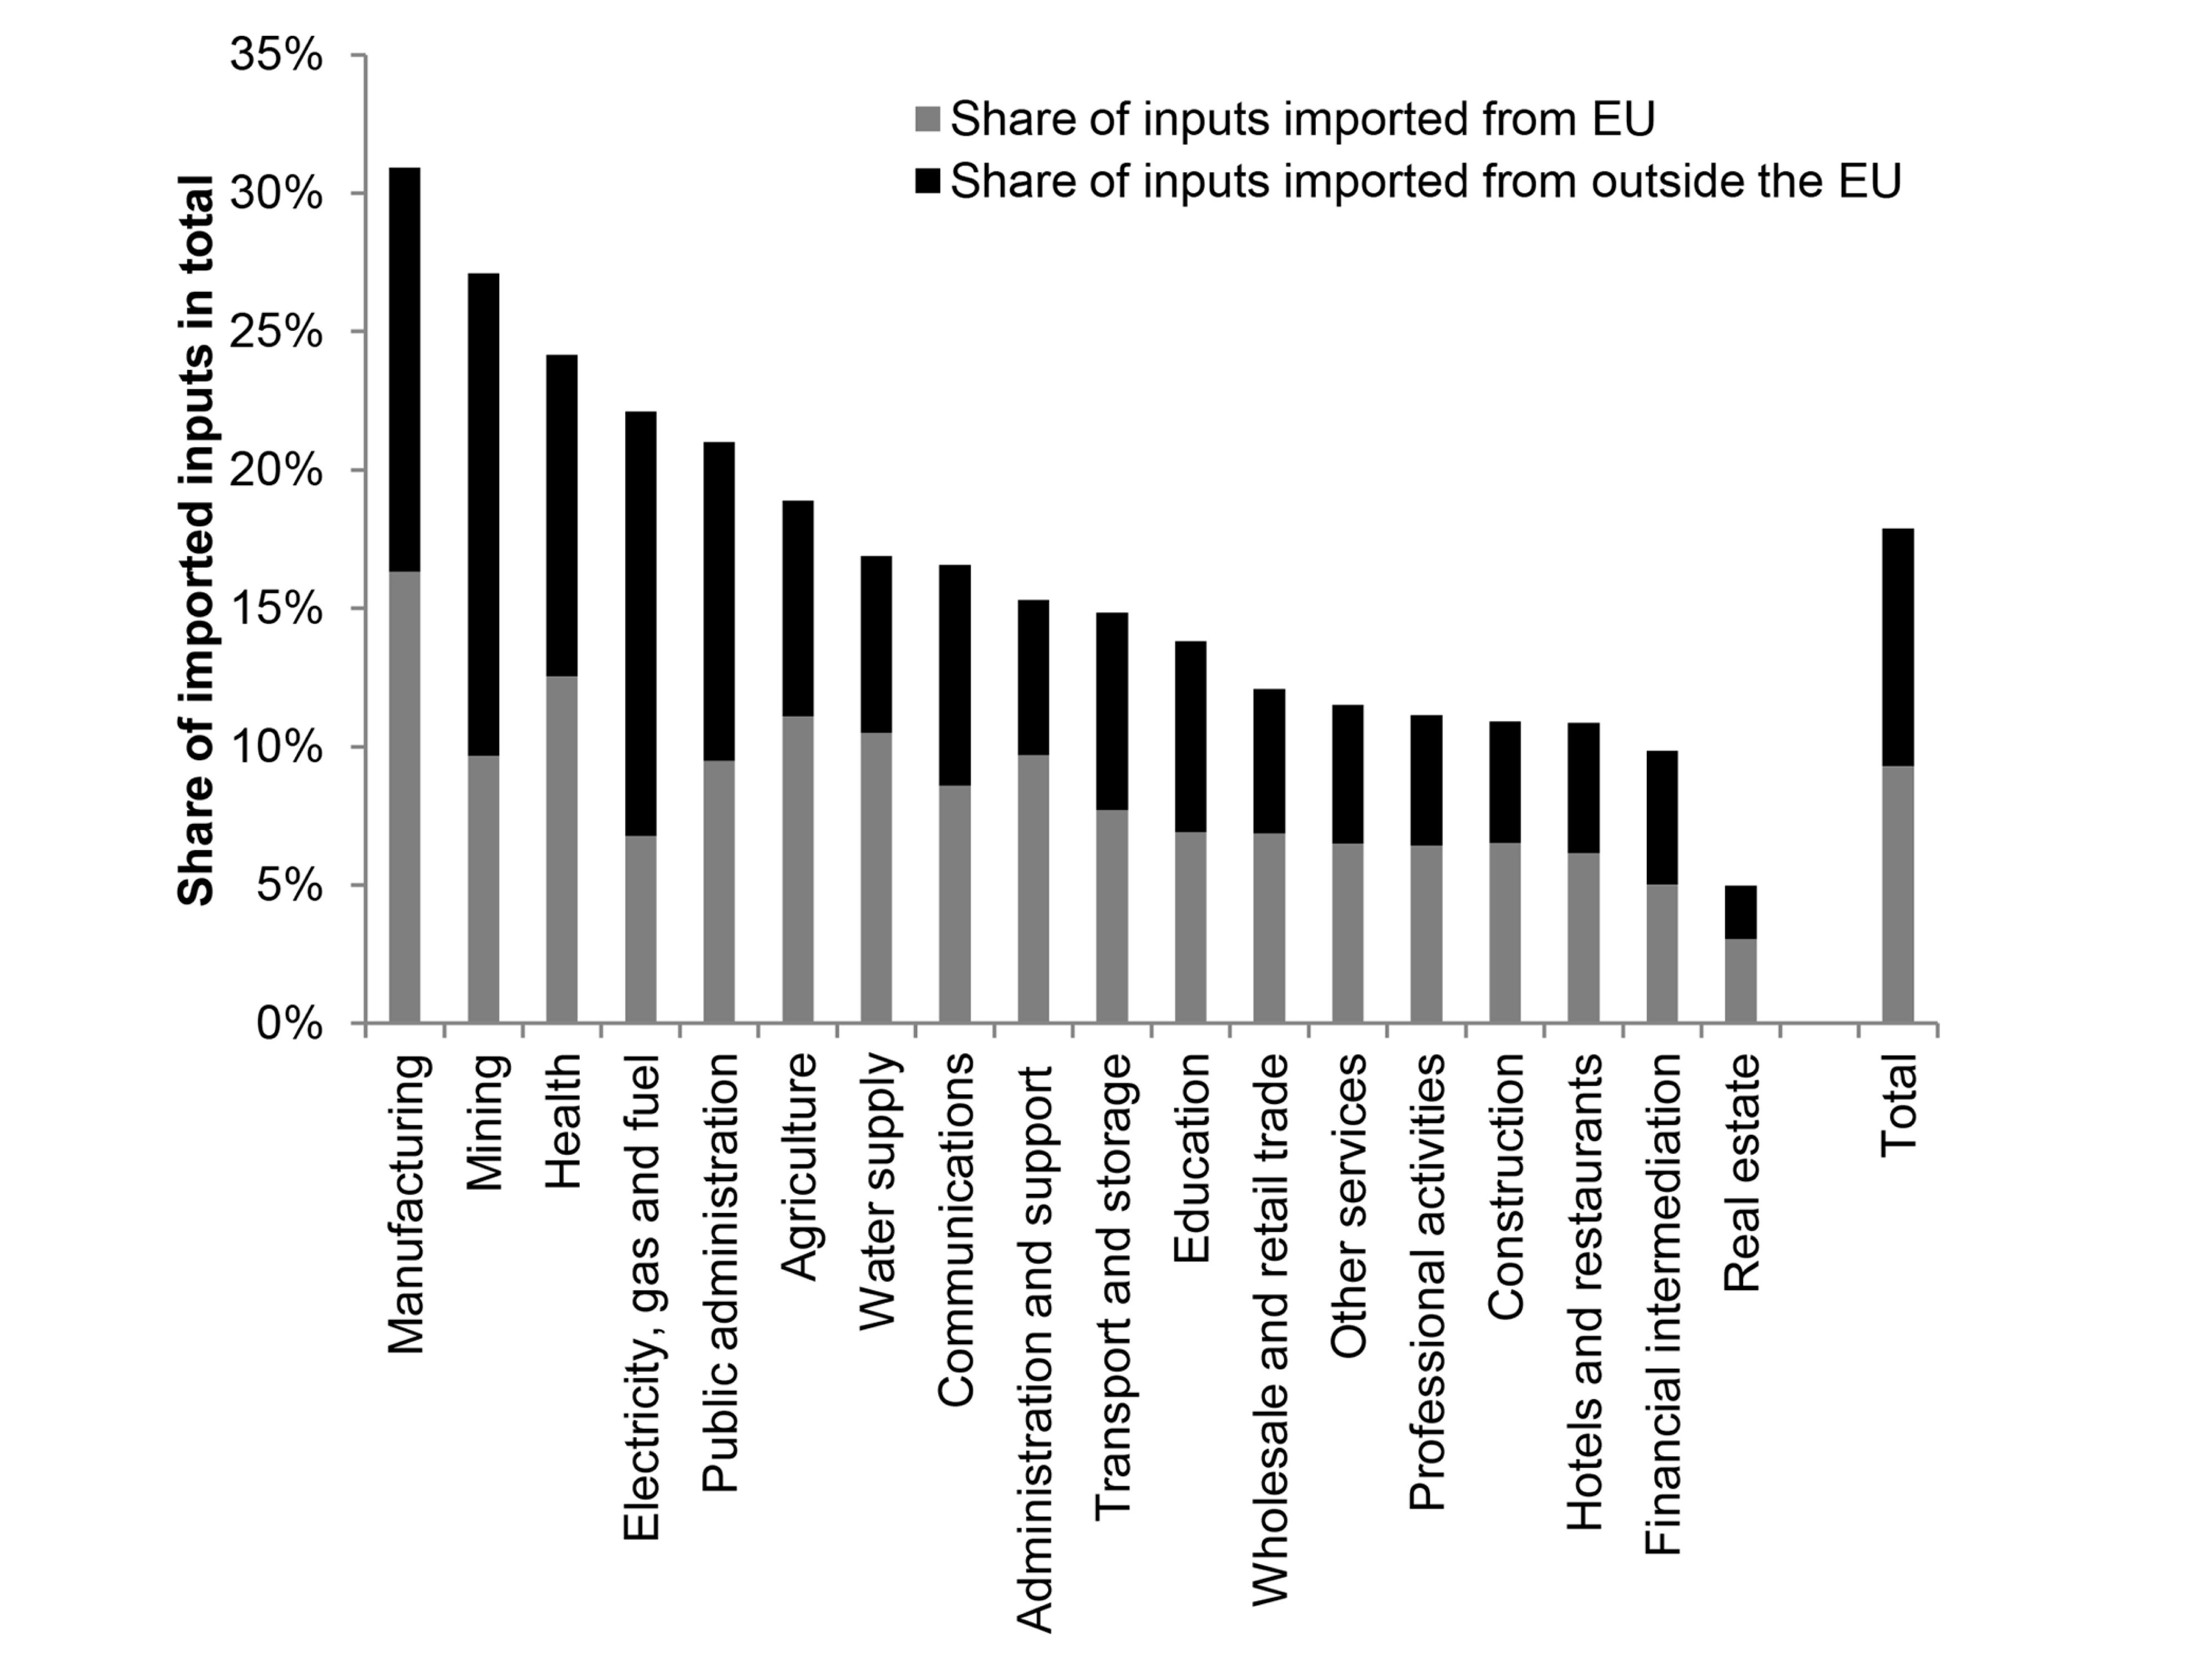 Share of UK inputs from abroad